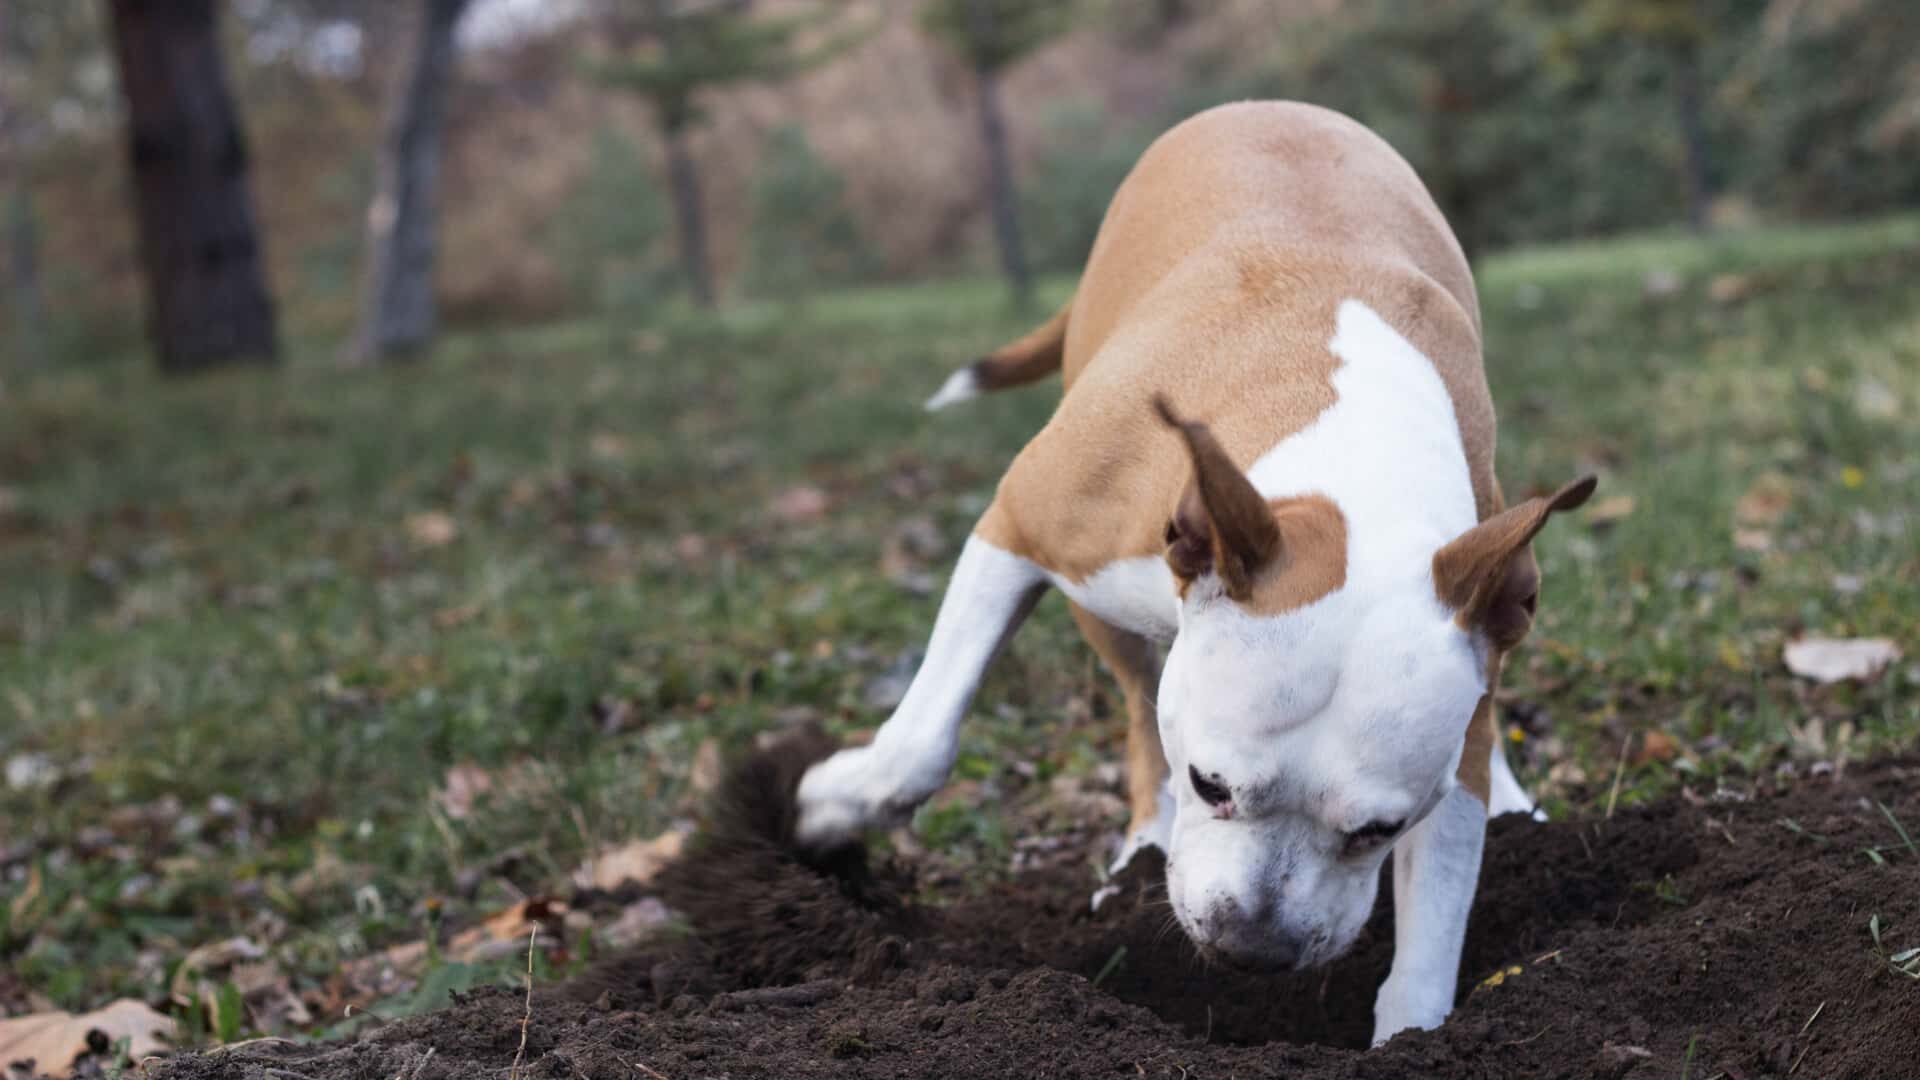 How to Keep Dog from Digging Under Fence: 5 DIY Solutions